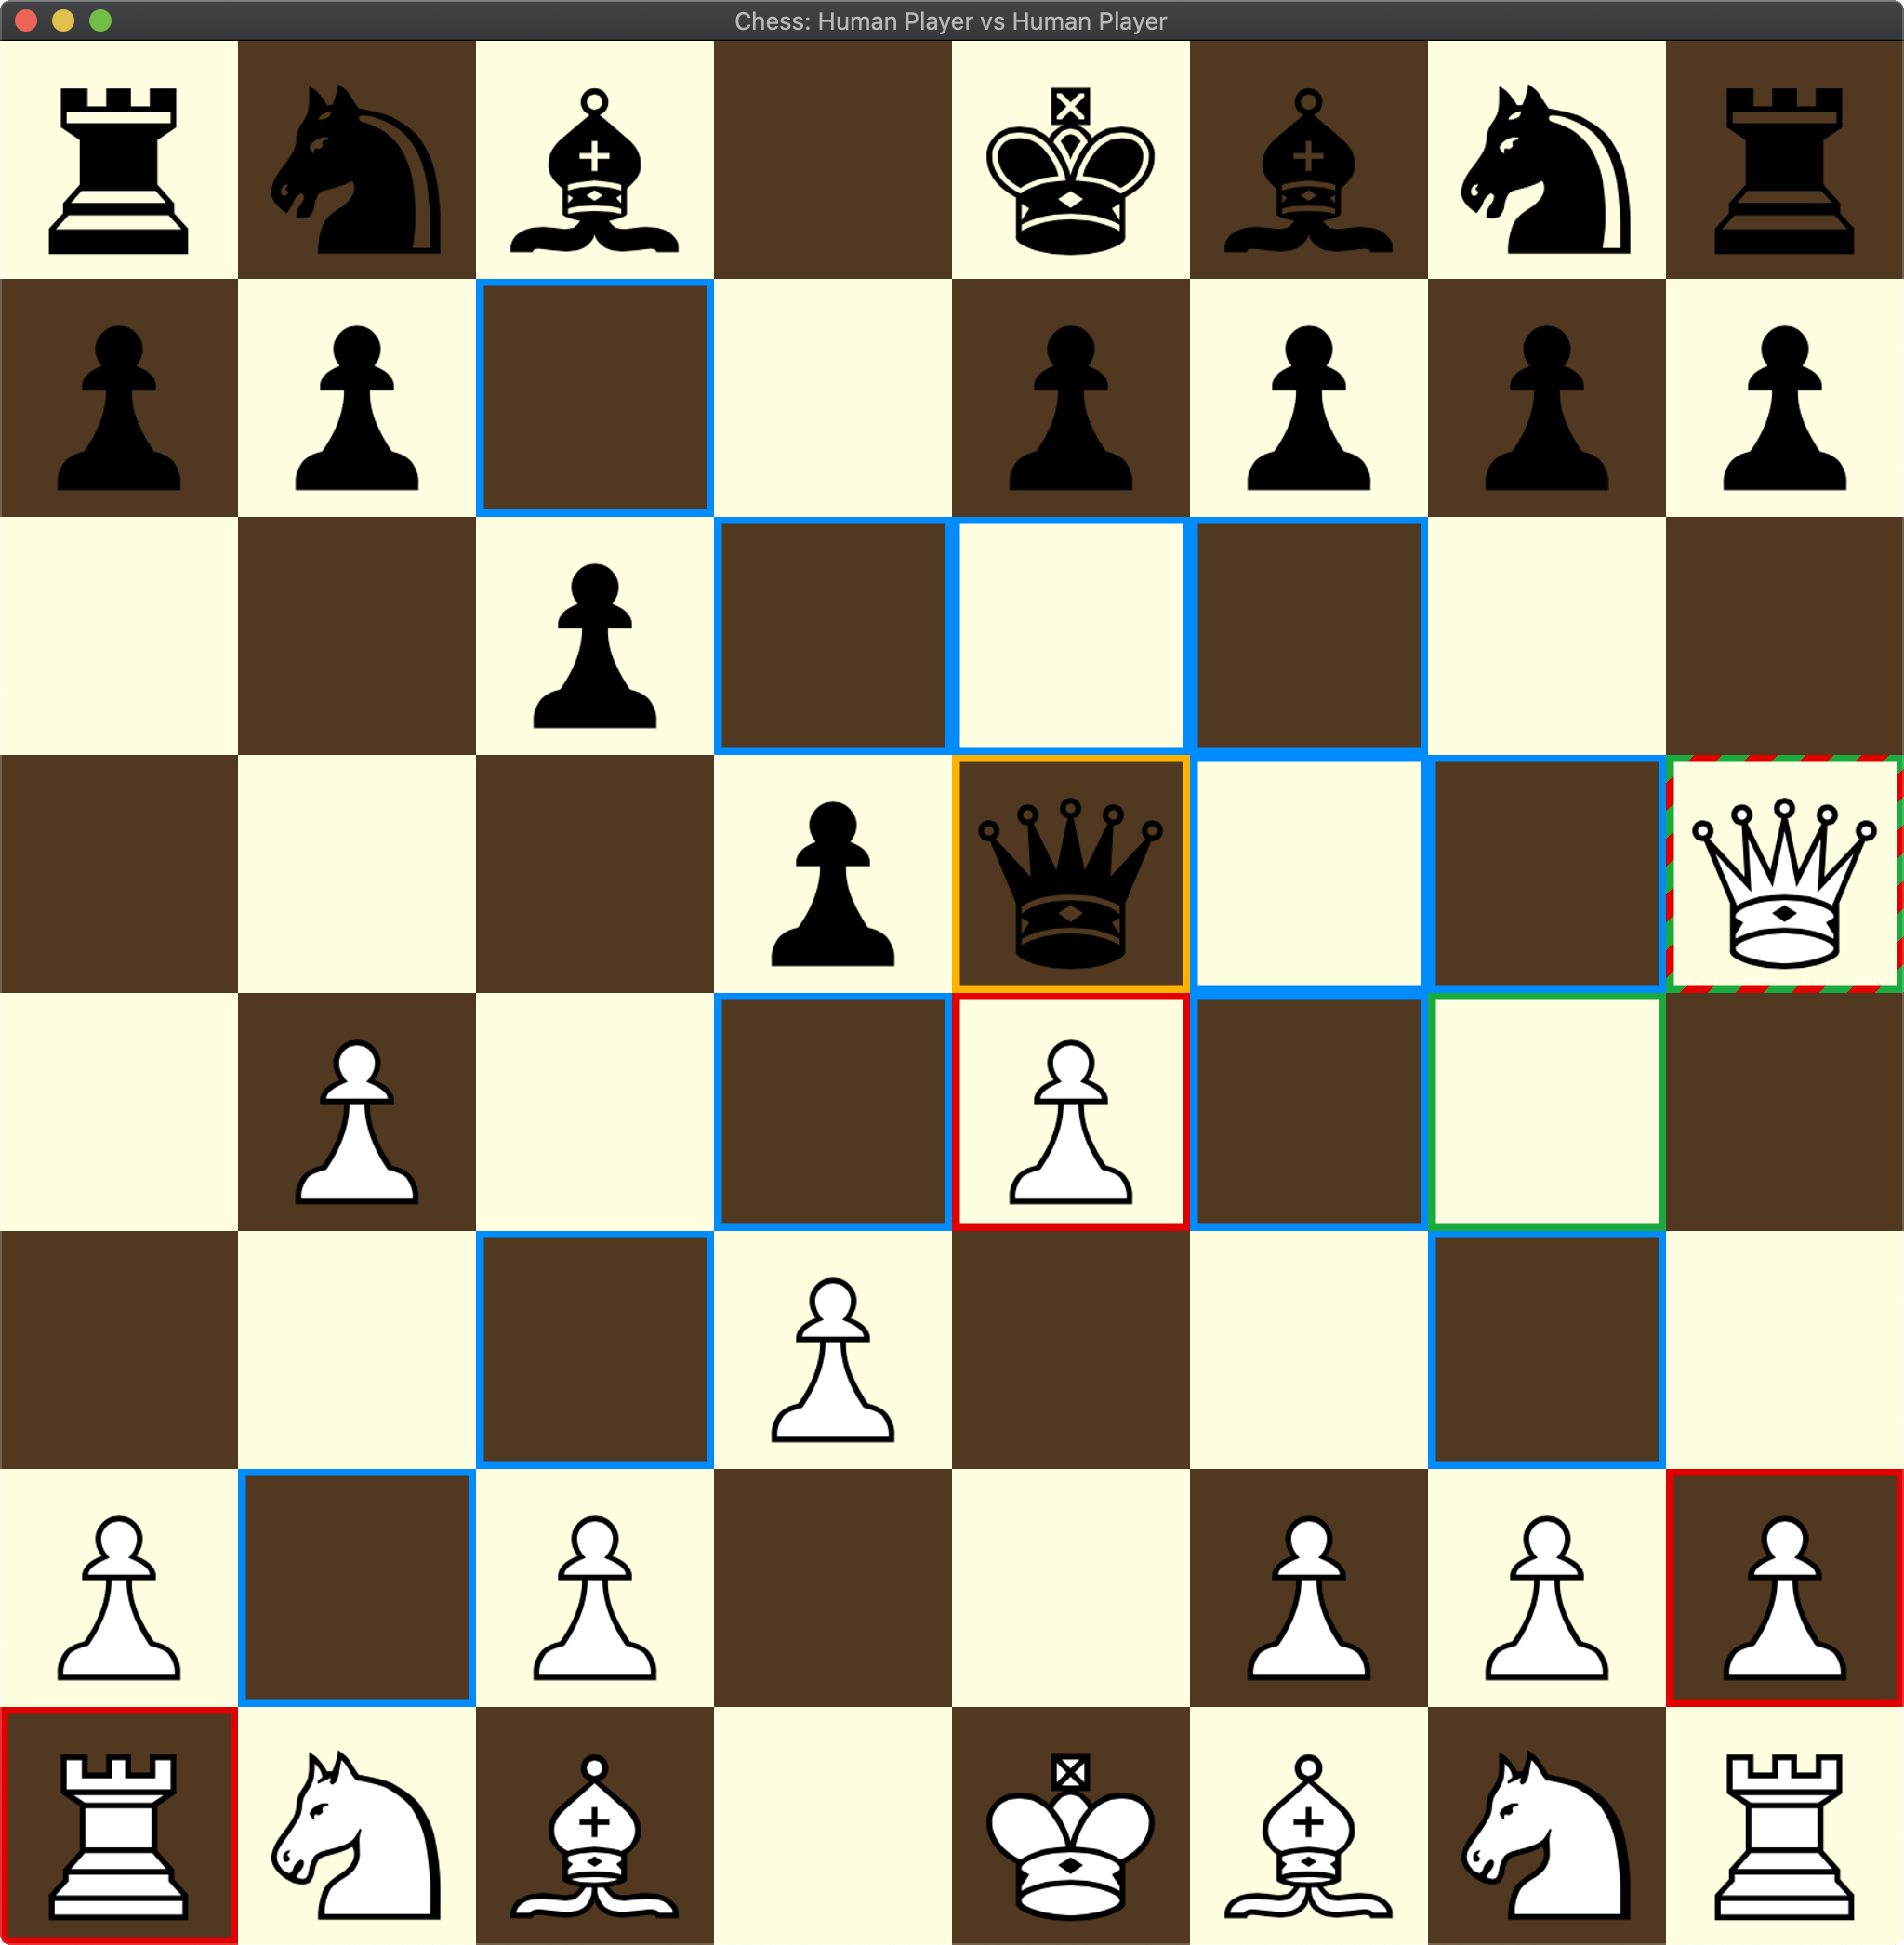 GitHub - alex65536/Chess256: Chess 256 is a chess program for playing,  editing and analysing chess games.